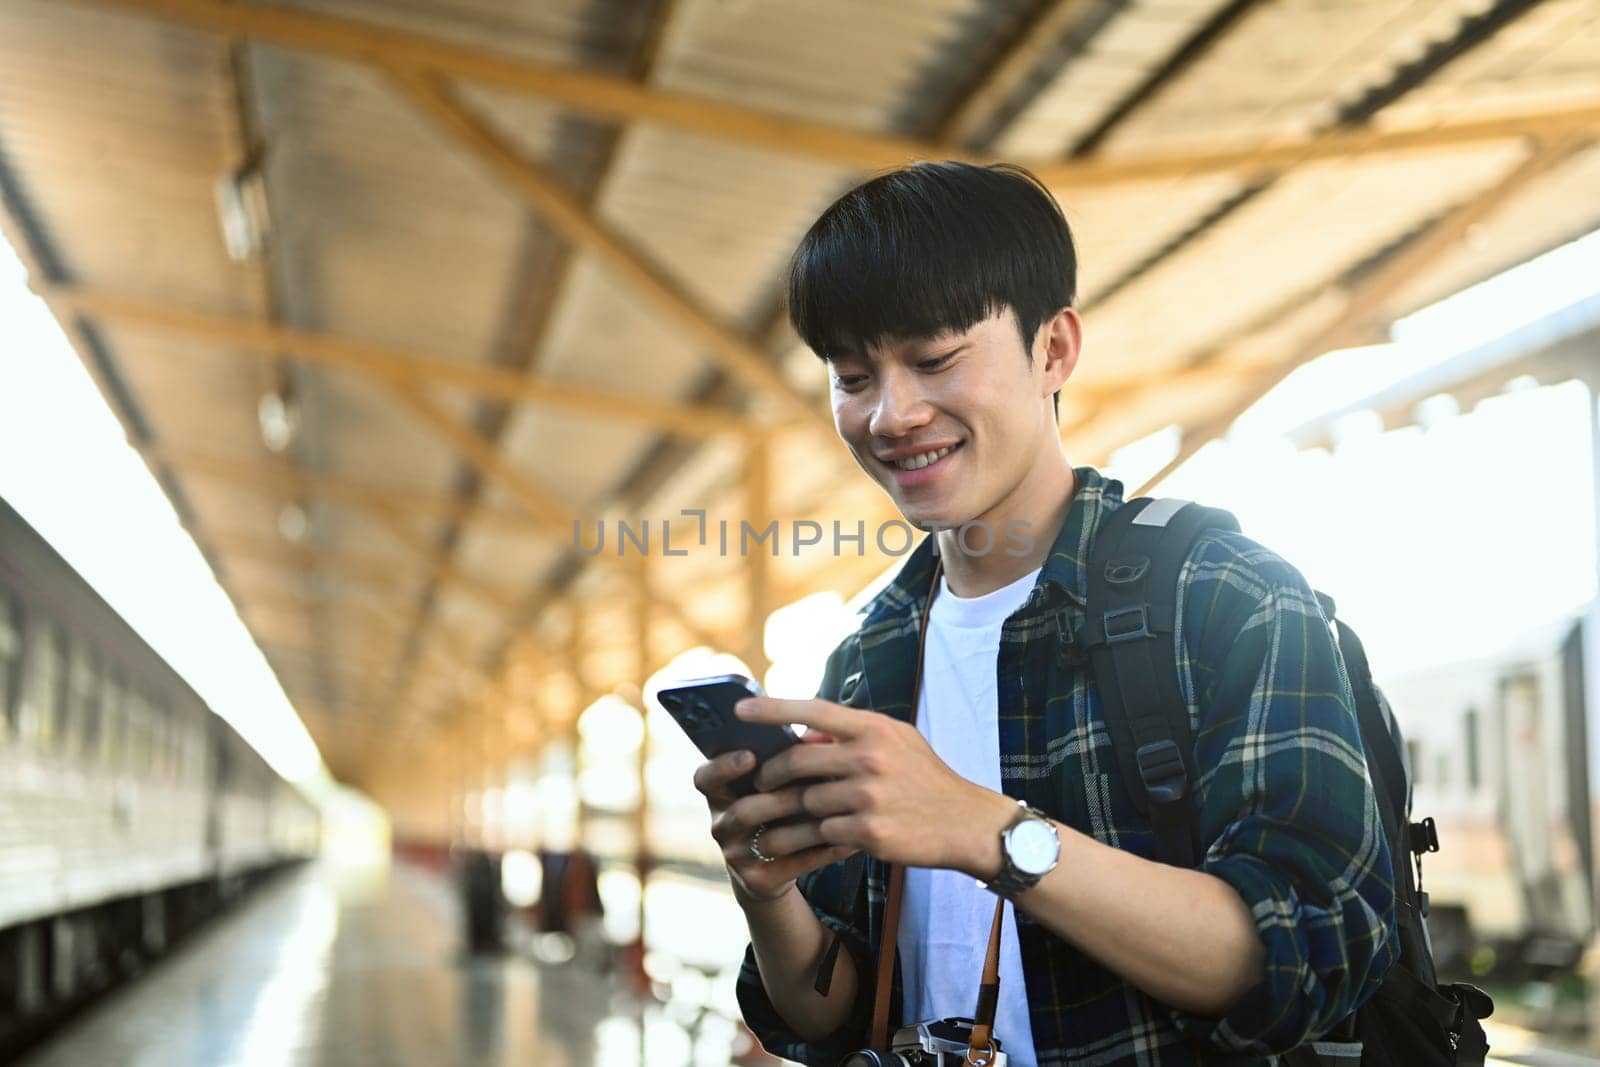 Smiling young man standing on the platform of a train station and using mobile phone by prathanchorruangsak